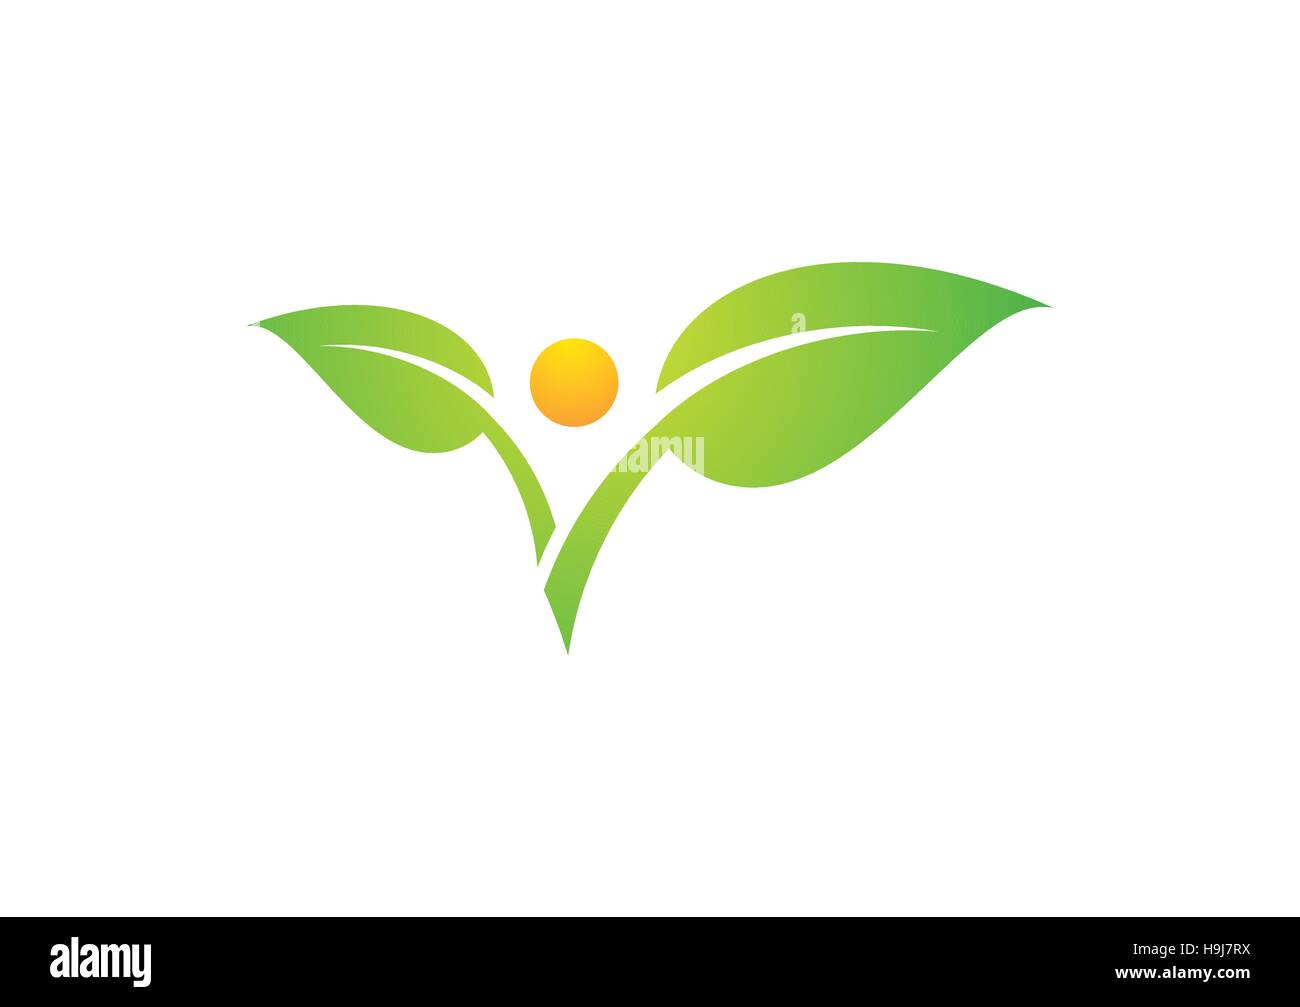 plant people natural health logo, sun leaf nature ecology concept icon, wellness symbol vector design Stock Vector